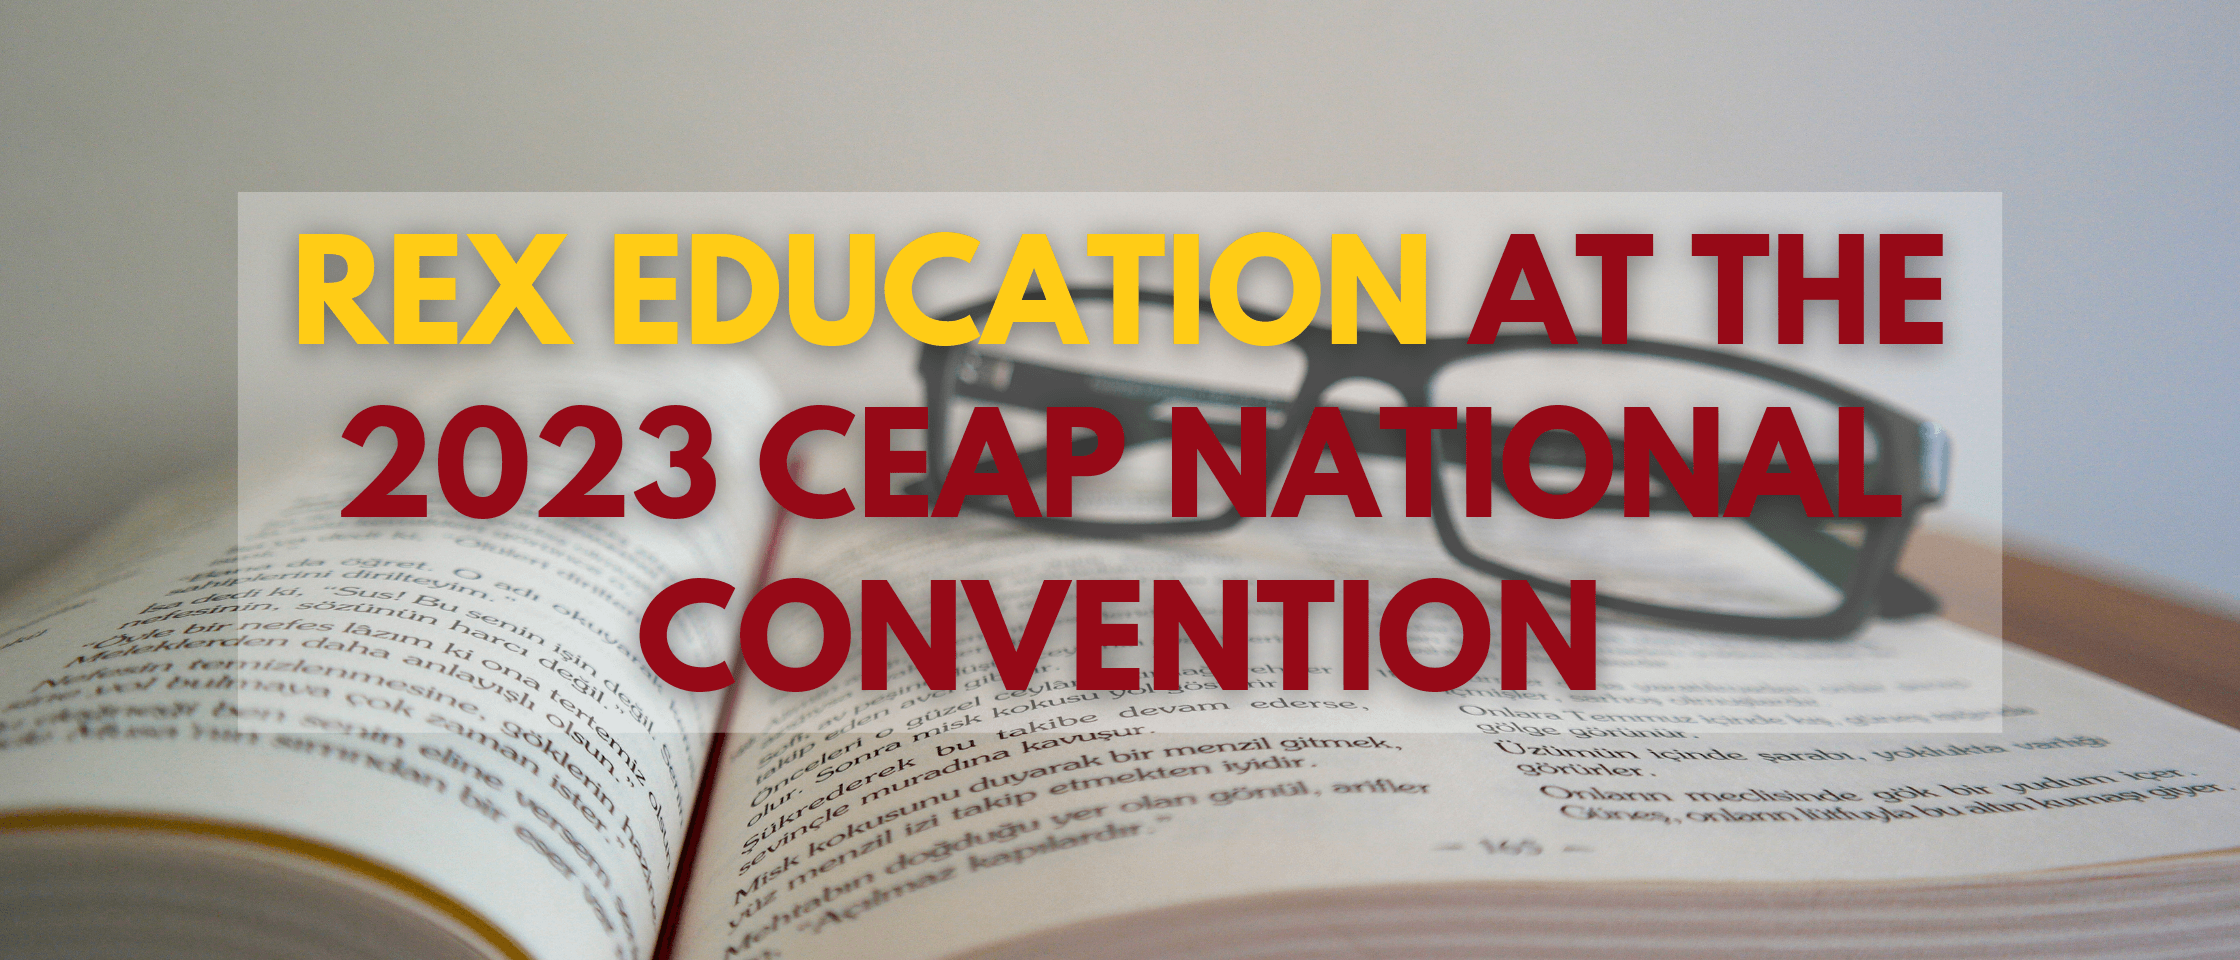 Rex Education at the 2023 CEAP National Convention